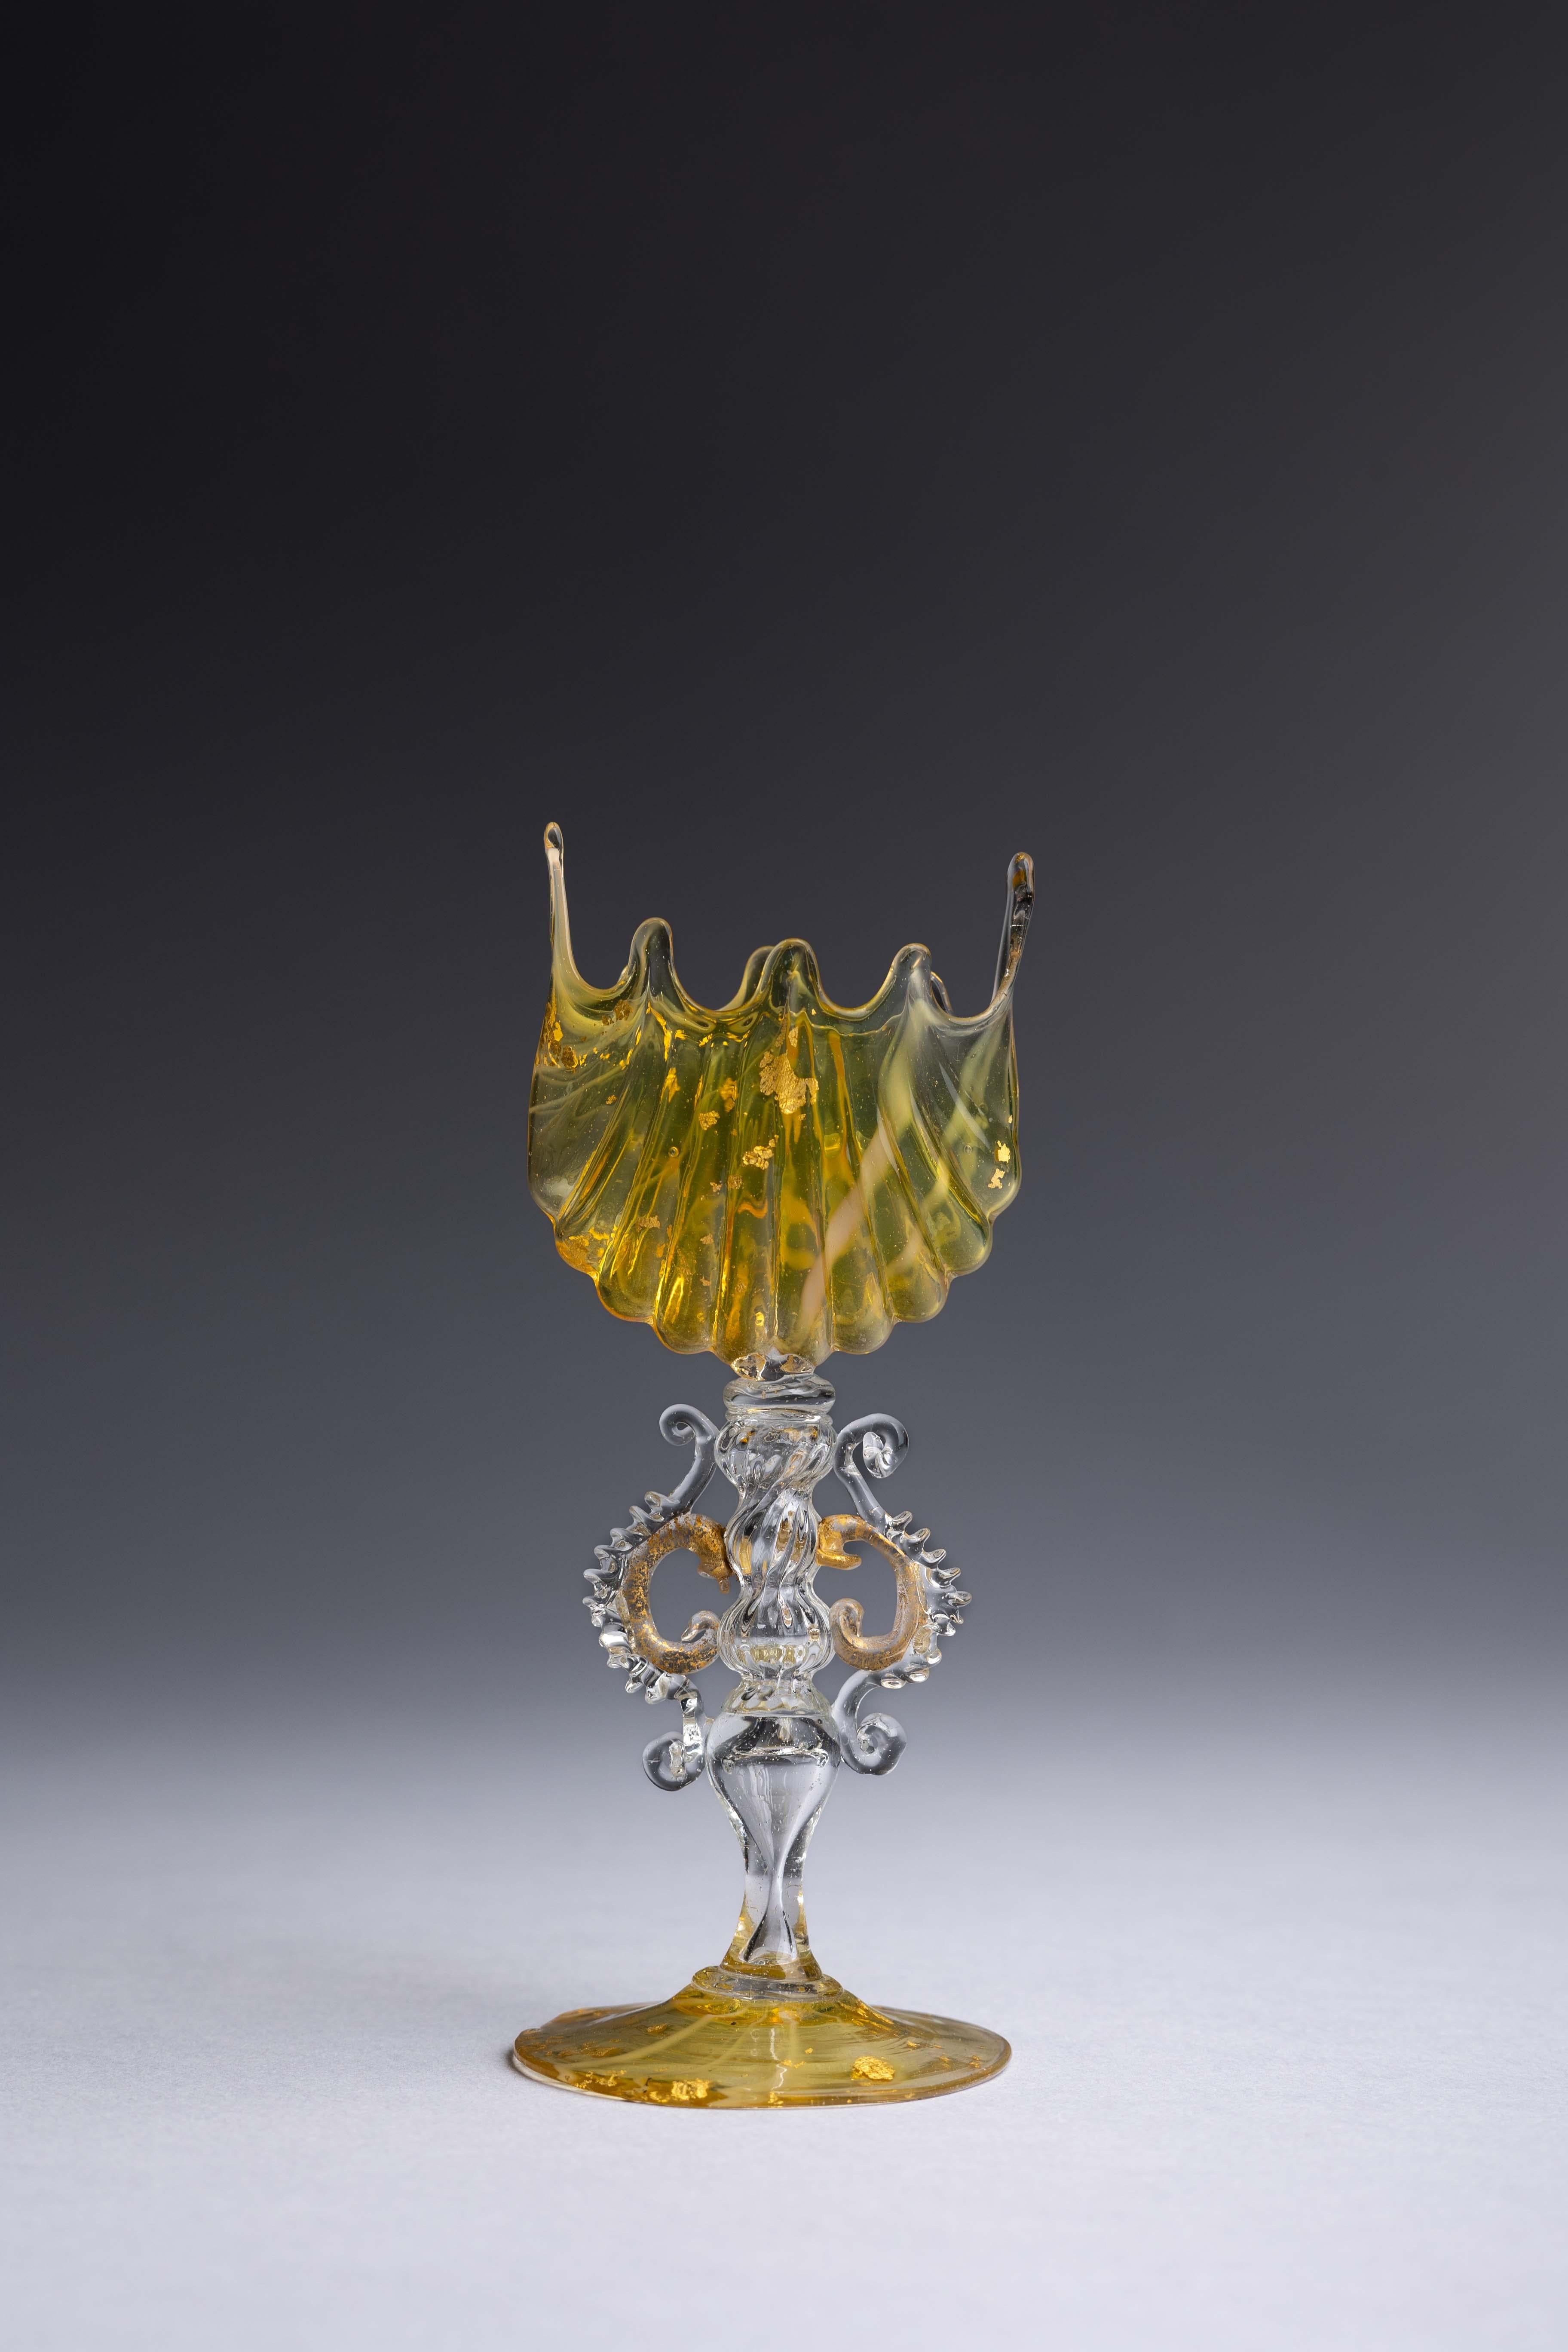 A Murano glass miniature goblet made by glass masters Salviati & Co in the late 19th century with yellow and clear glass with flecks of gold twisted into an incredibly intricate shape.

During the late 19th century, the Italian Risorgimento